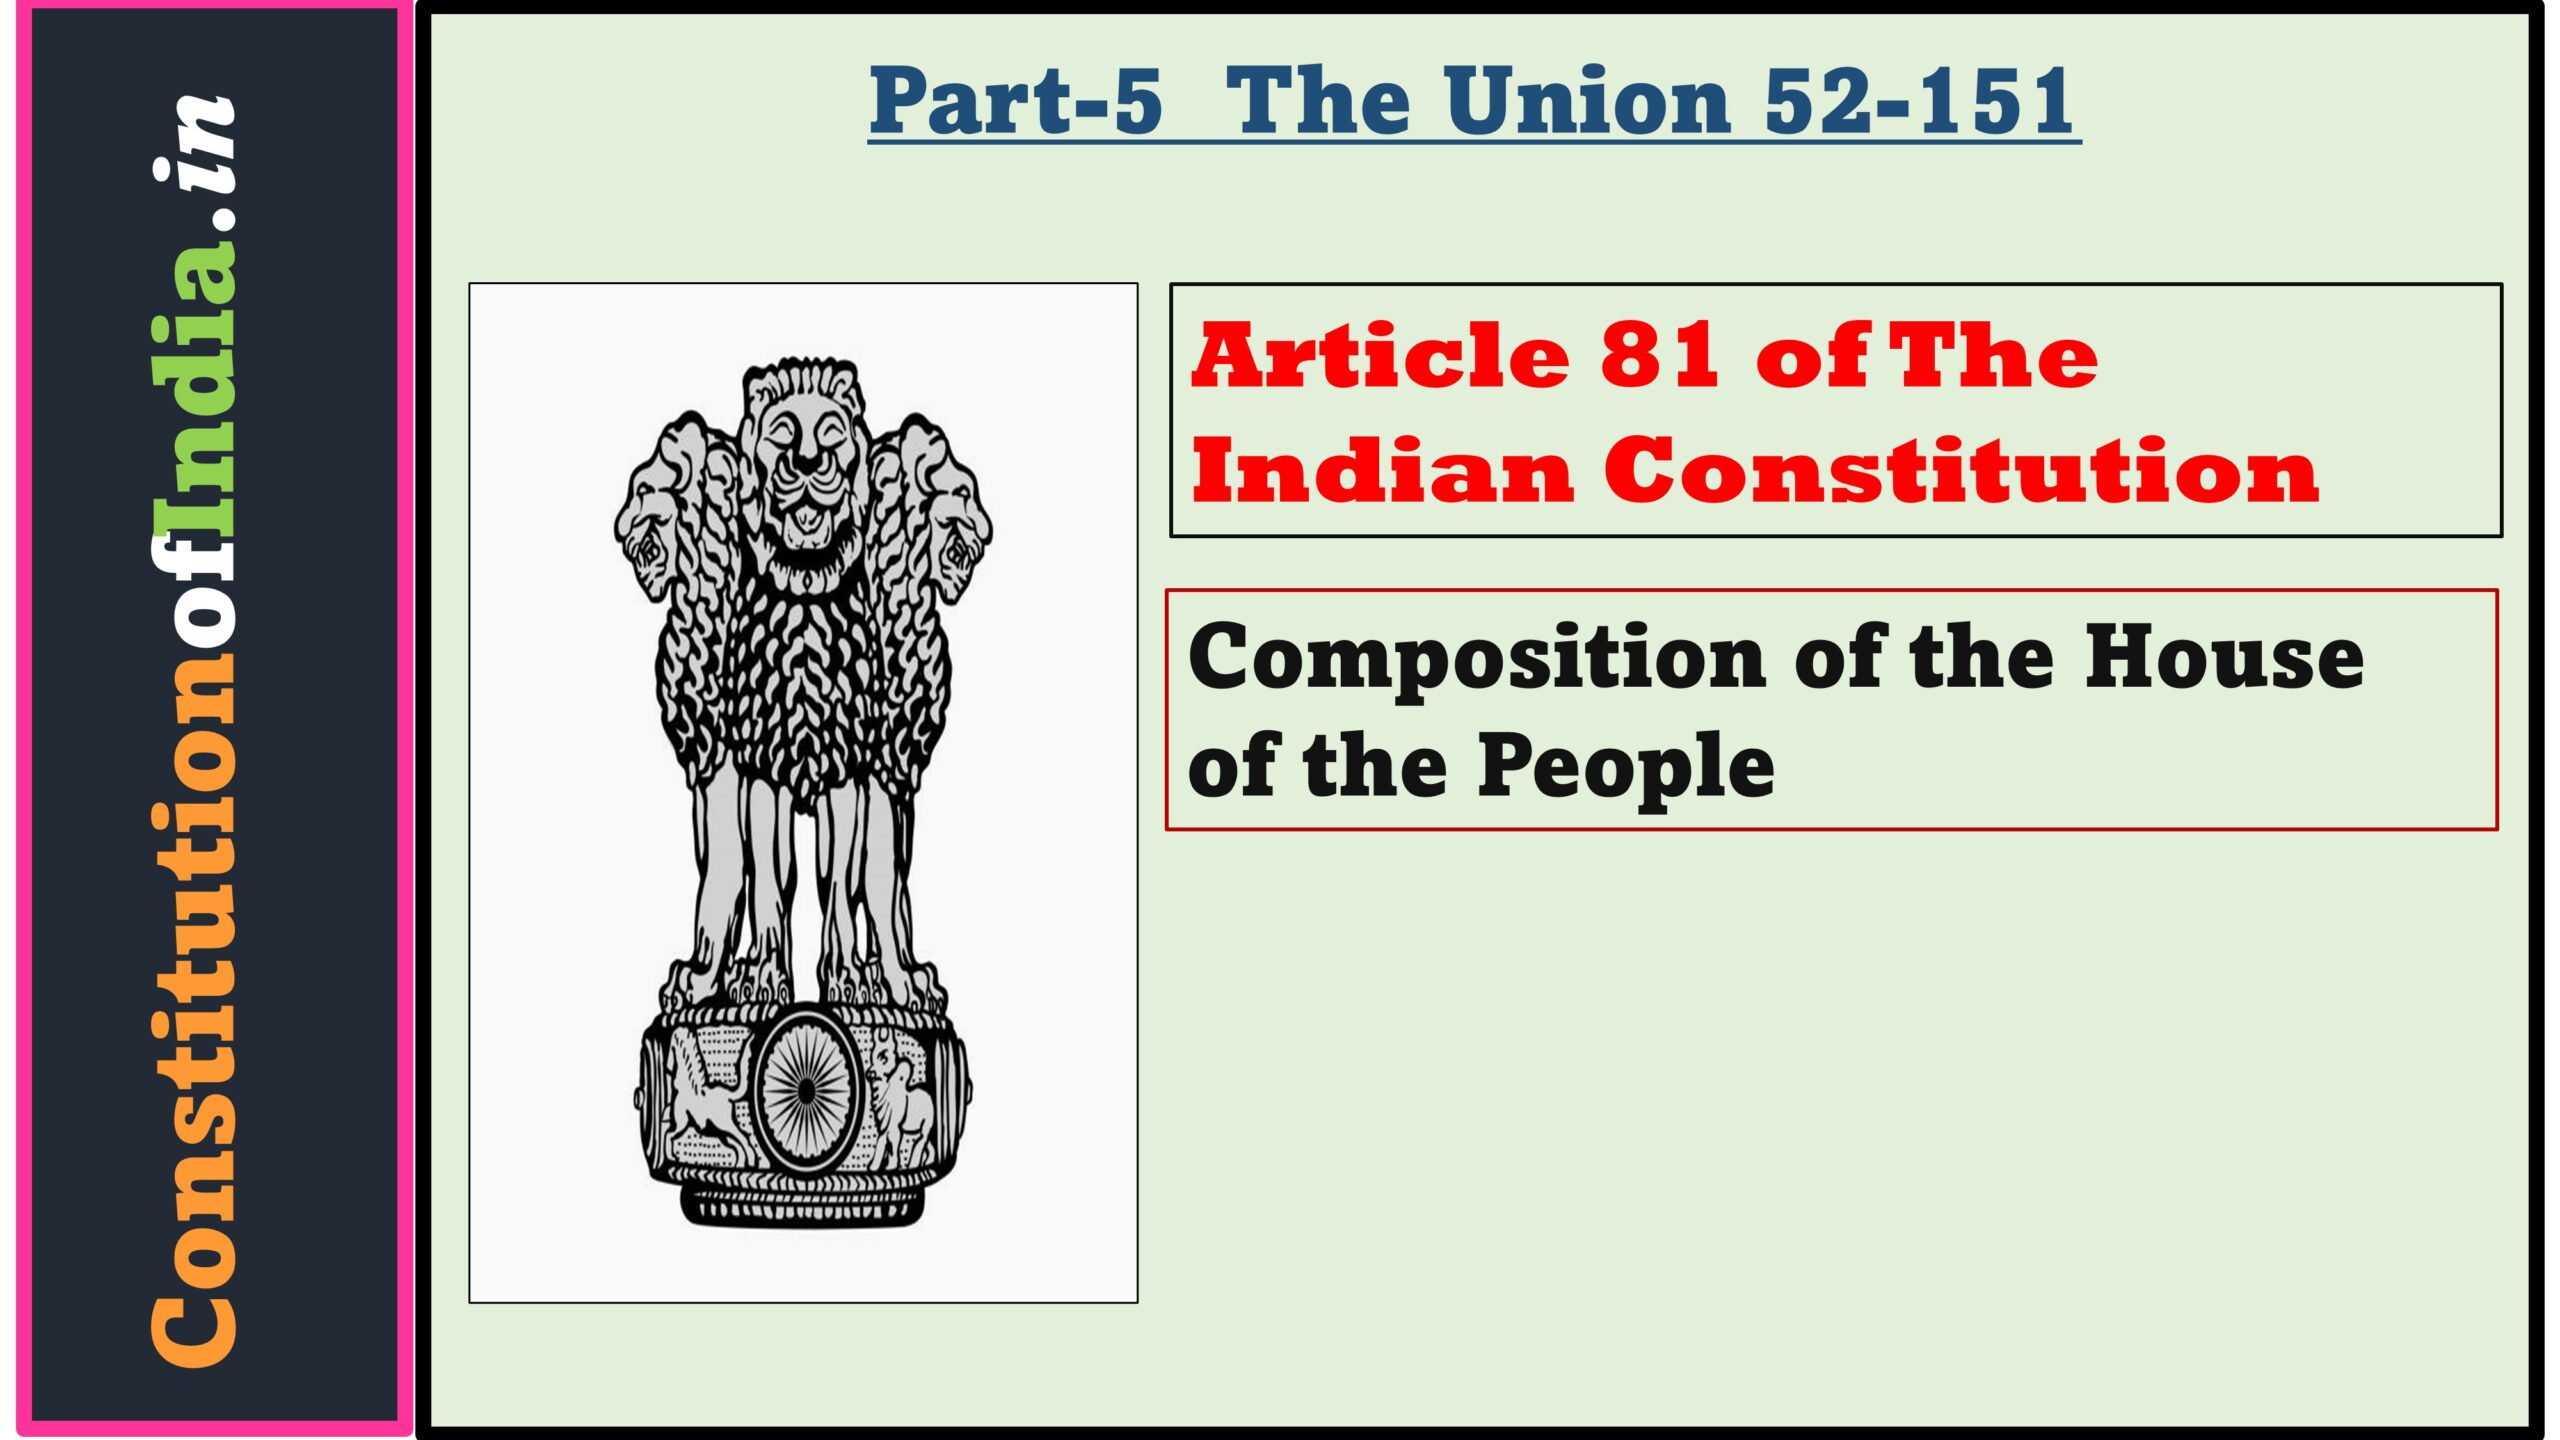 Article 81 of The Indian Constitution